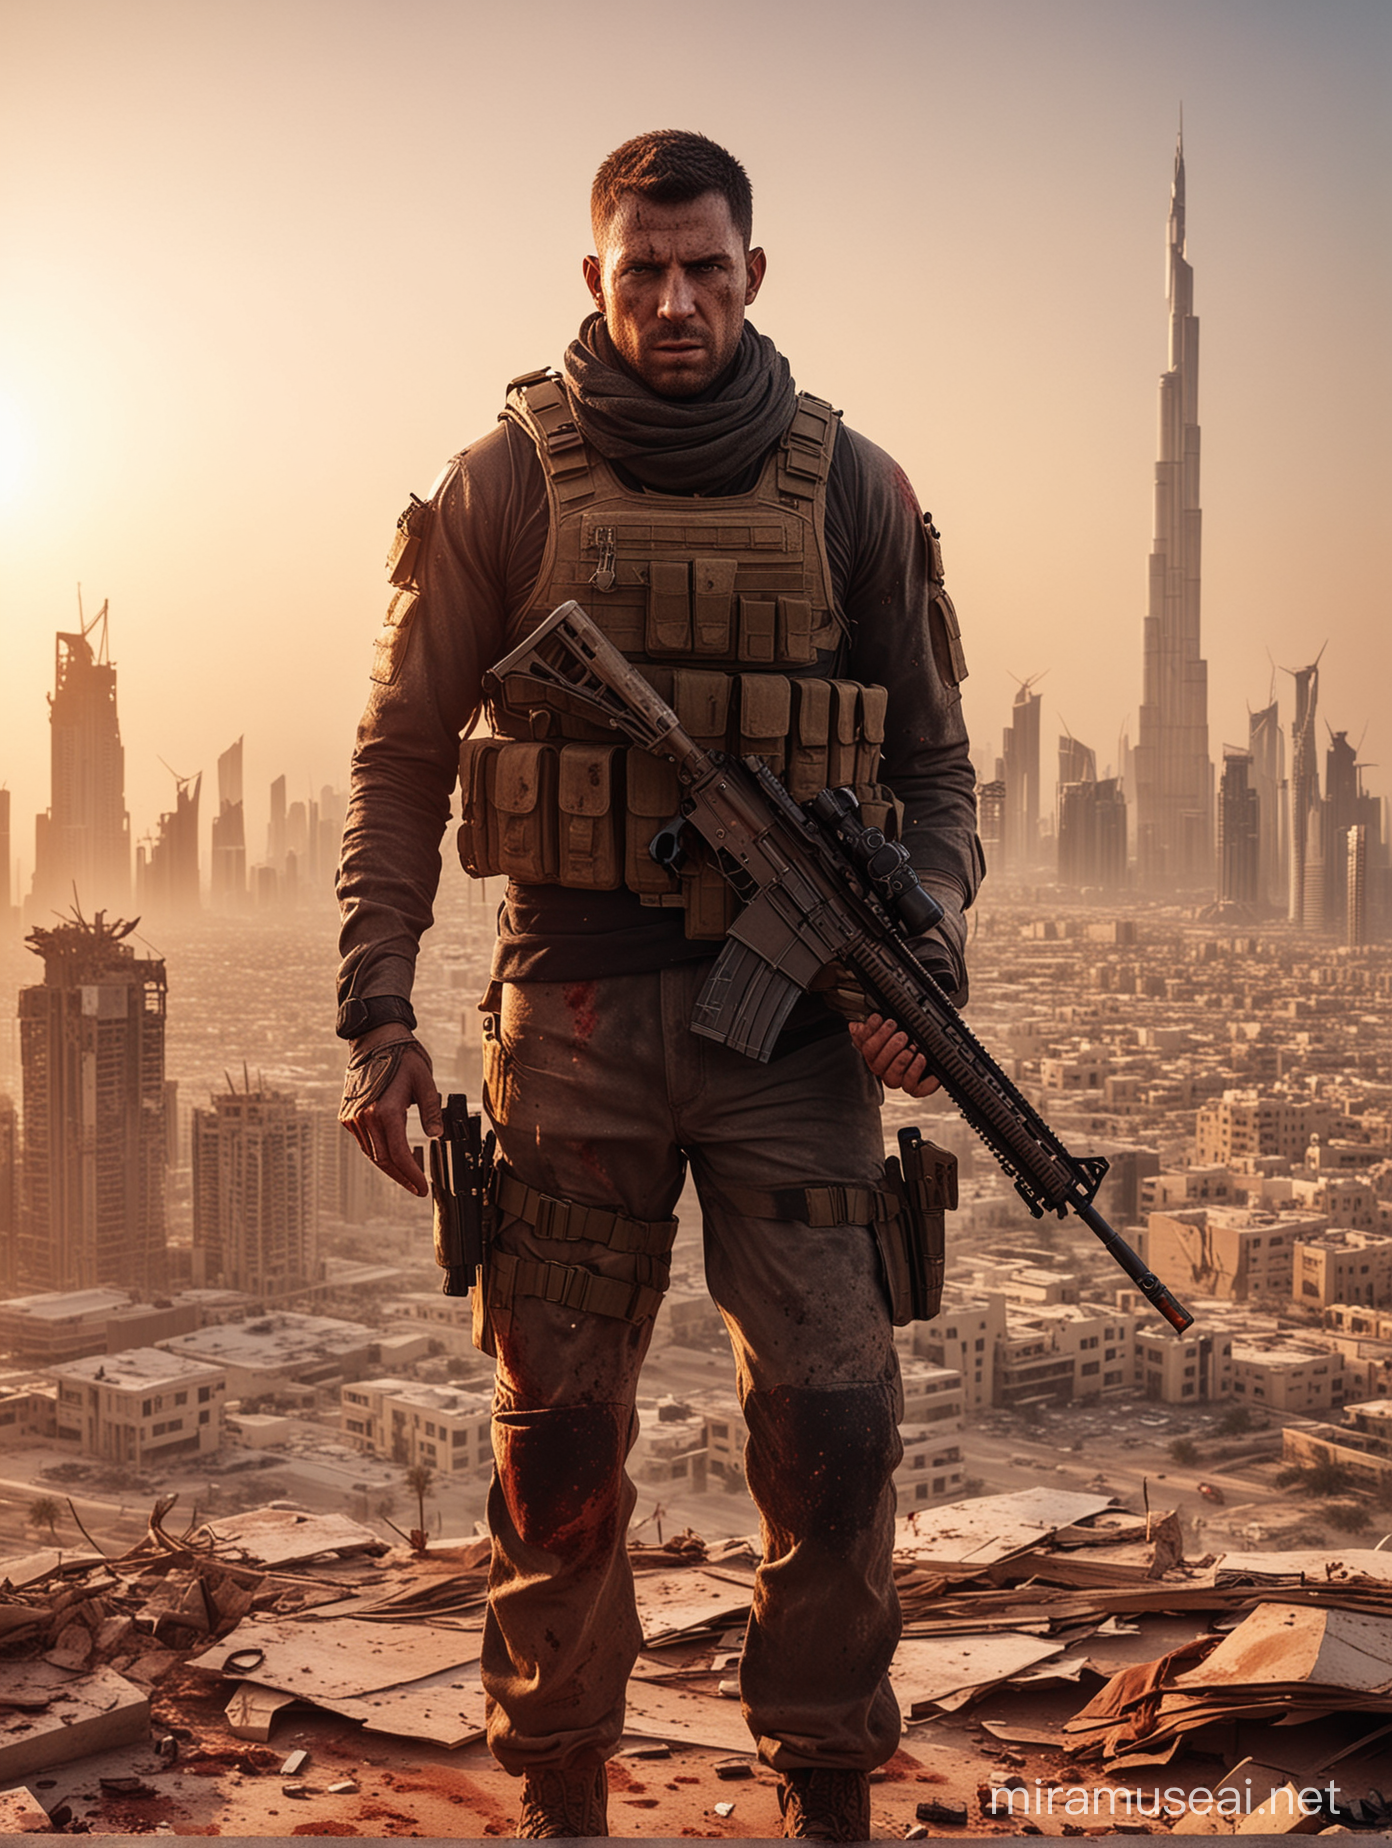 Special Ops Soldier Covered in Blood with Sniper on Dubai Rooftop at Golden Hour